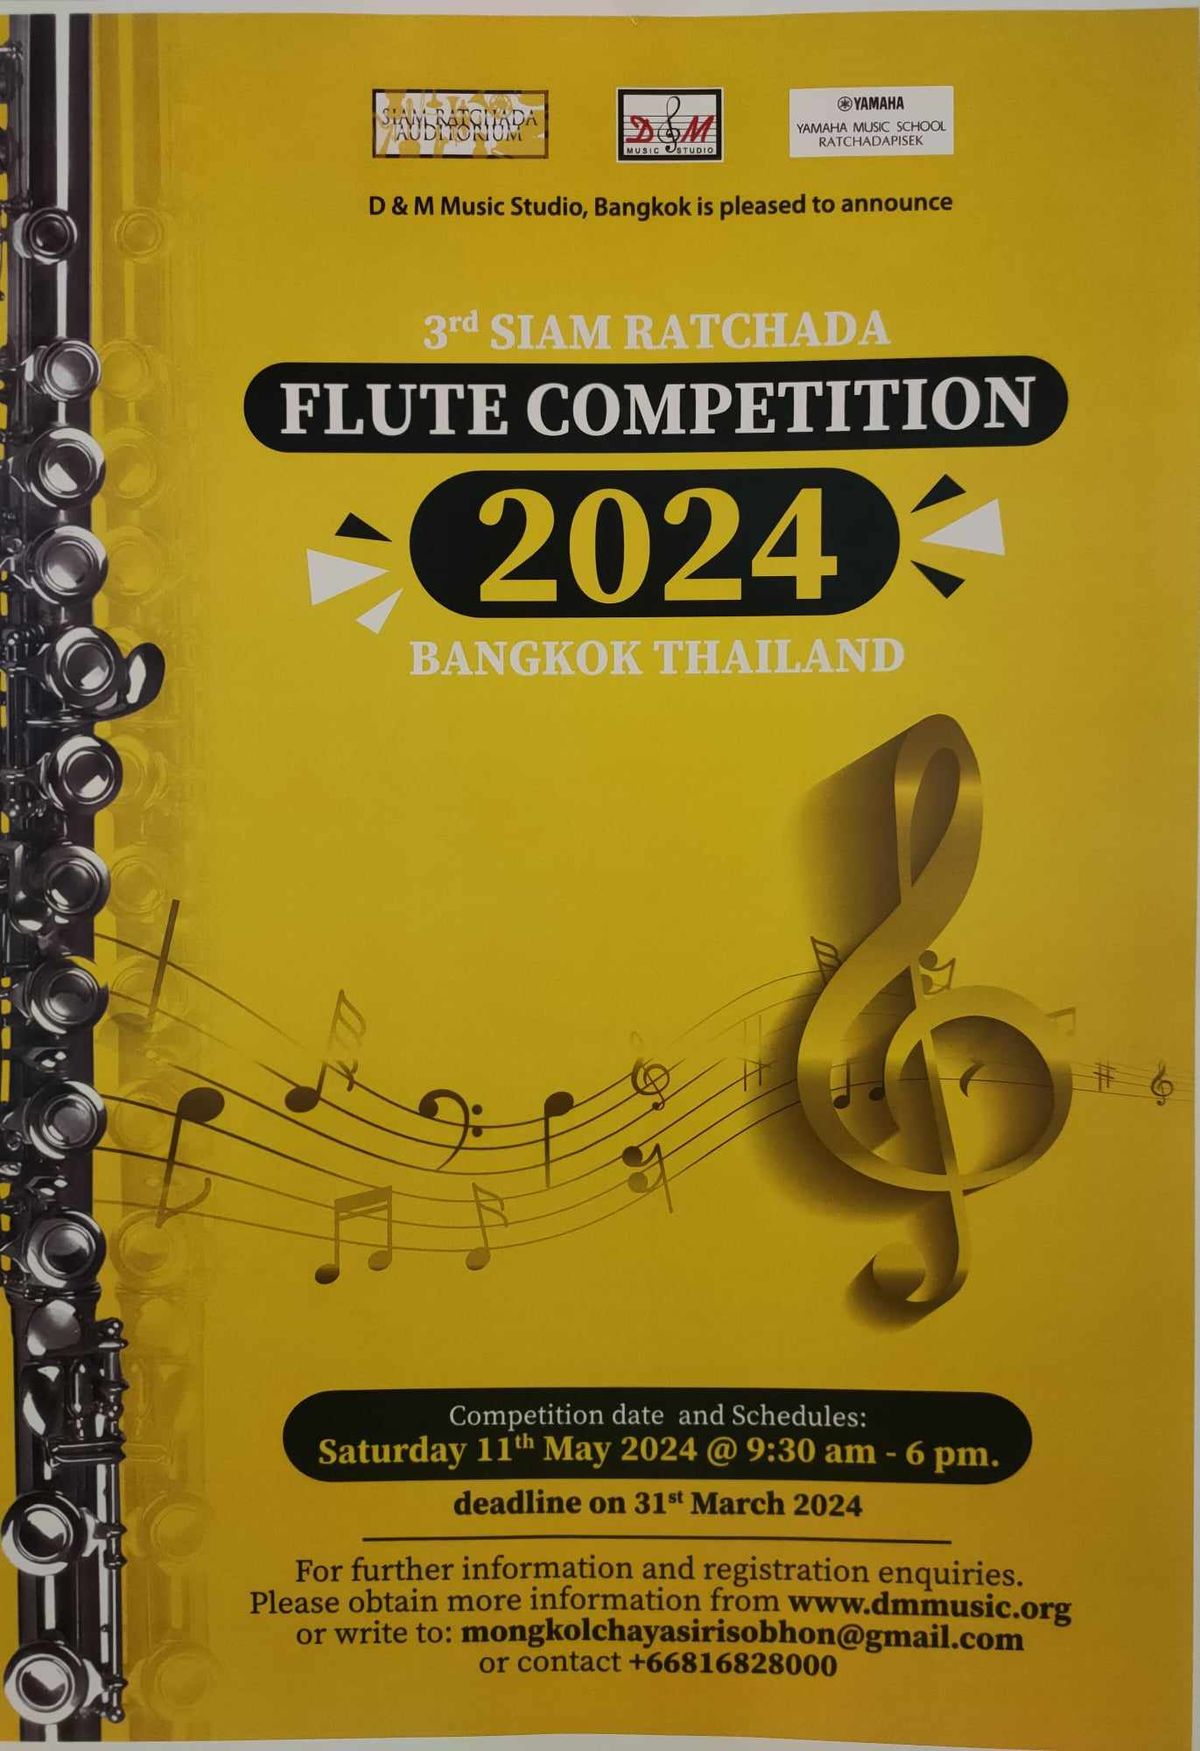 FLUTE COMPETITION 2024